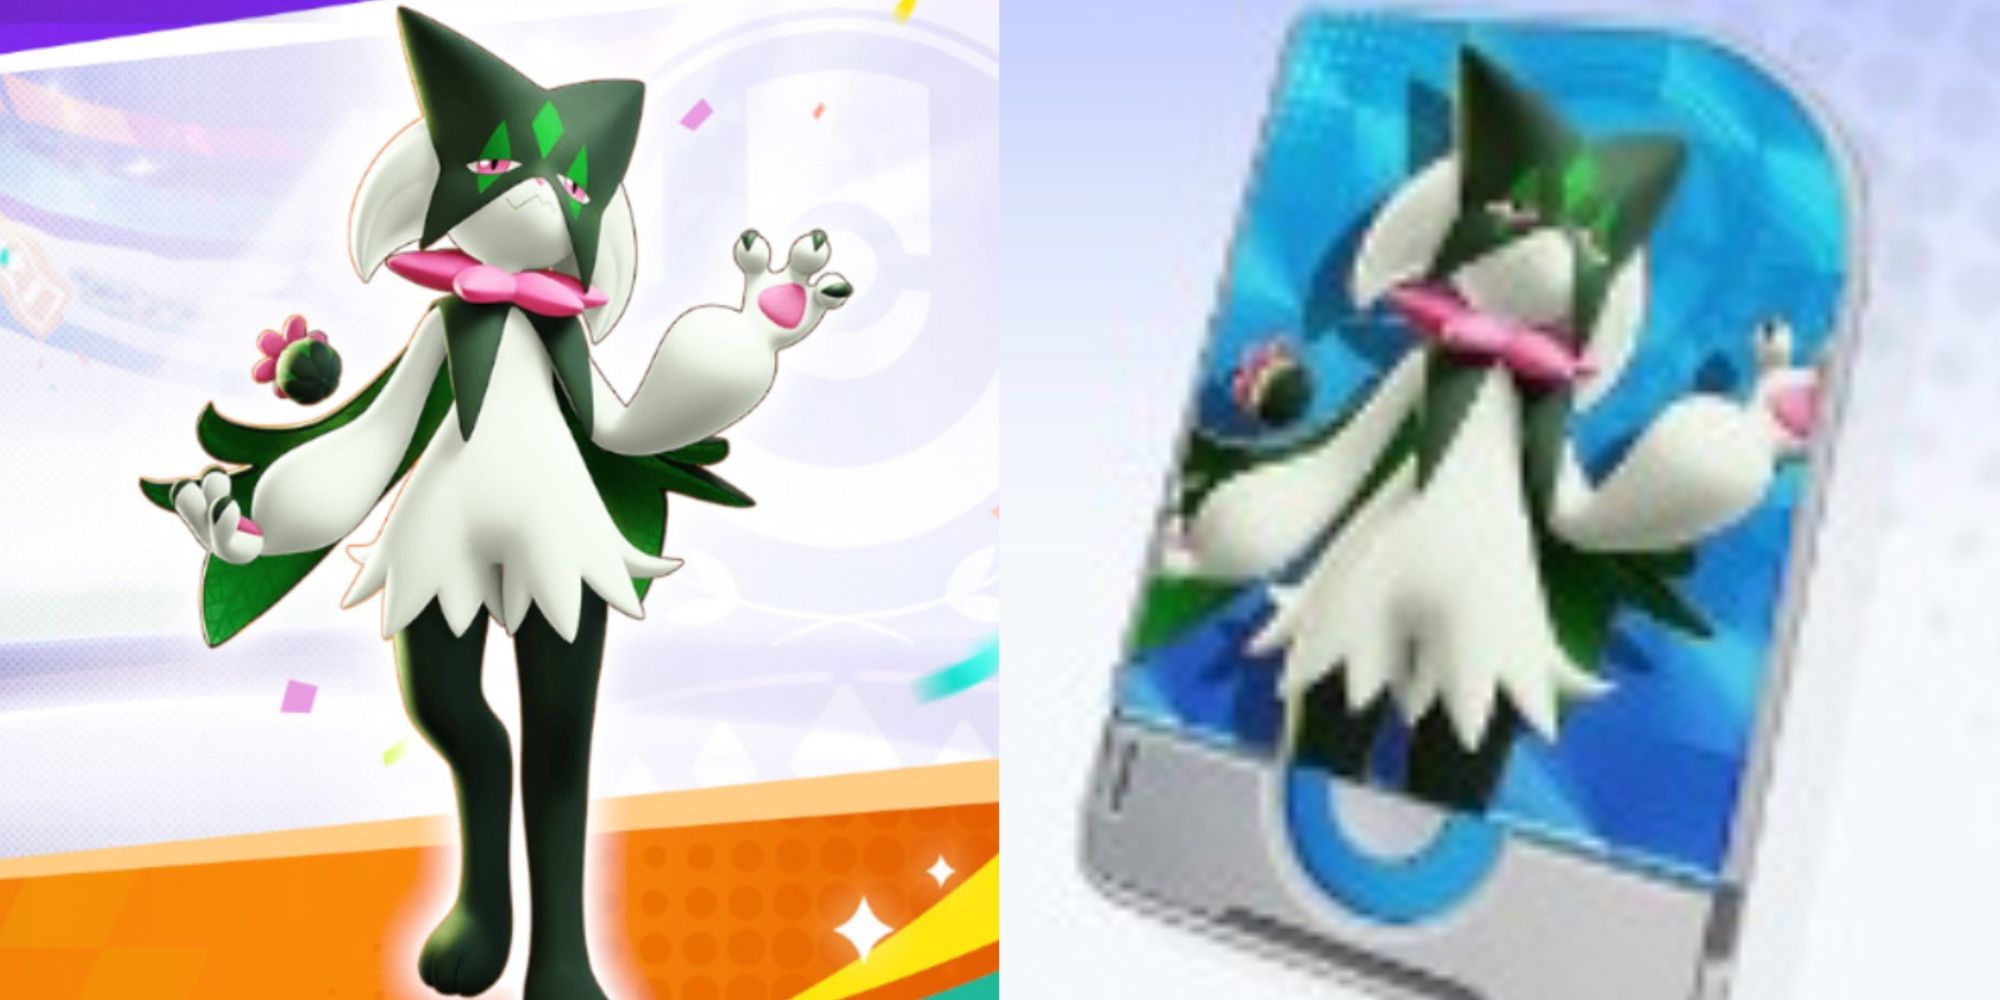 A split image of Meowscarada's introduction banner and its Unite License in Pokemon Unite.